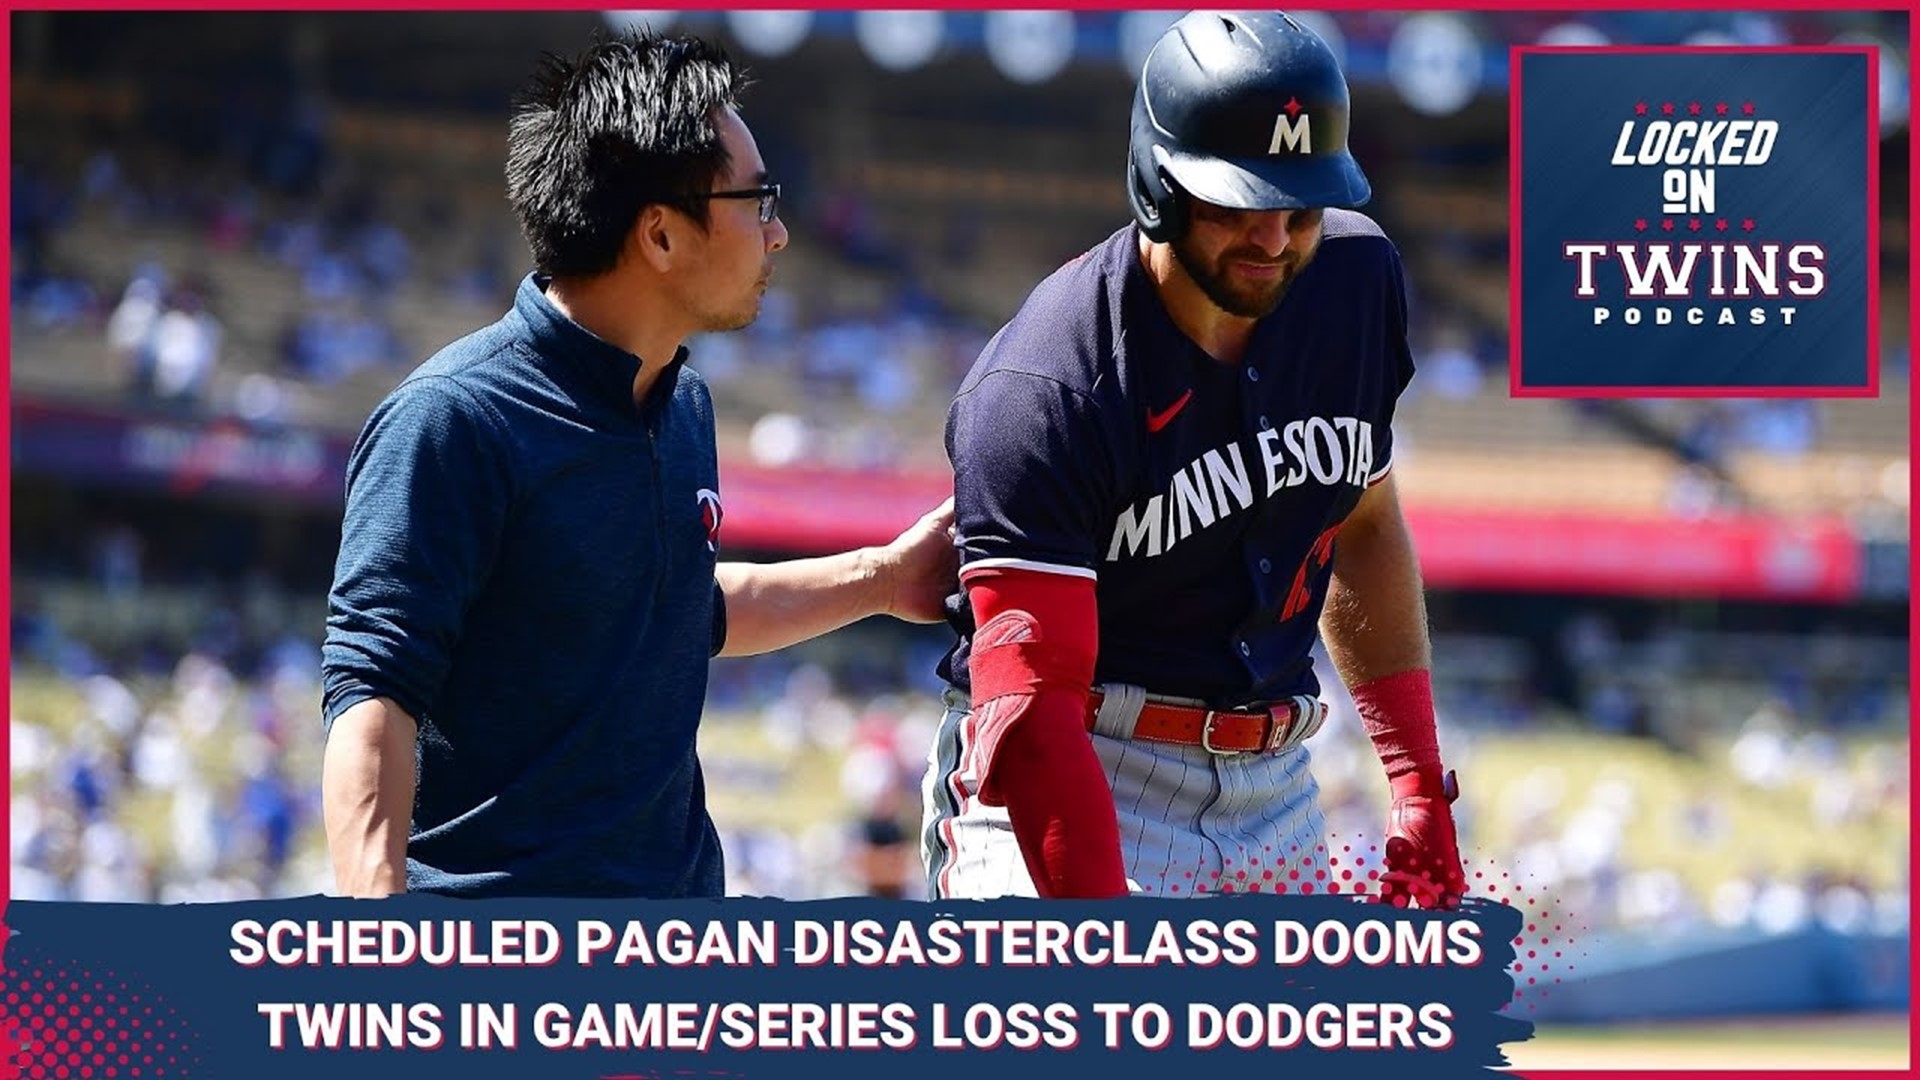 Despite a less-than-stellar start from Sonny Gray, the Twins were in position to still steal a series from the Dodgers before Emilio Pagan imploded late